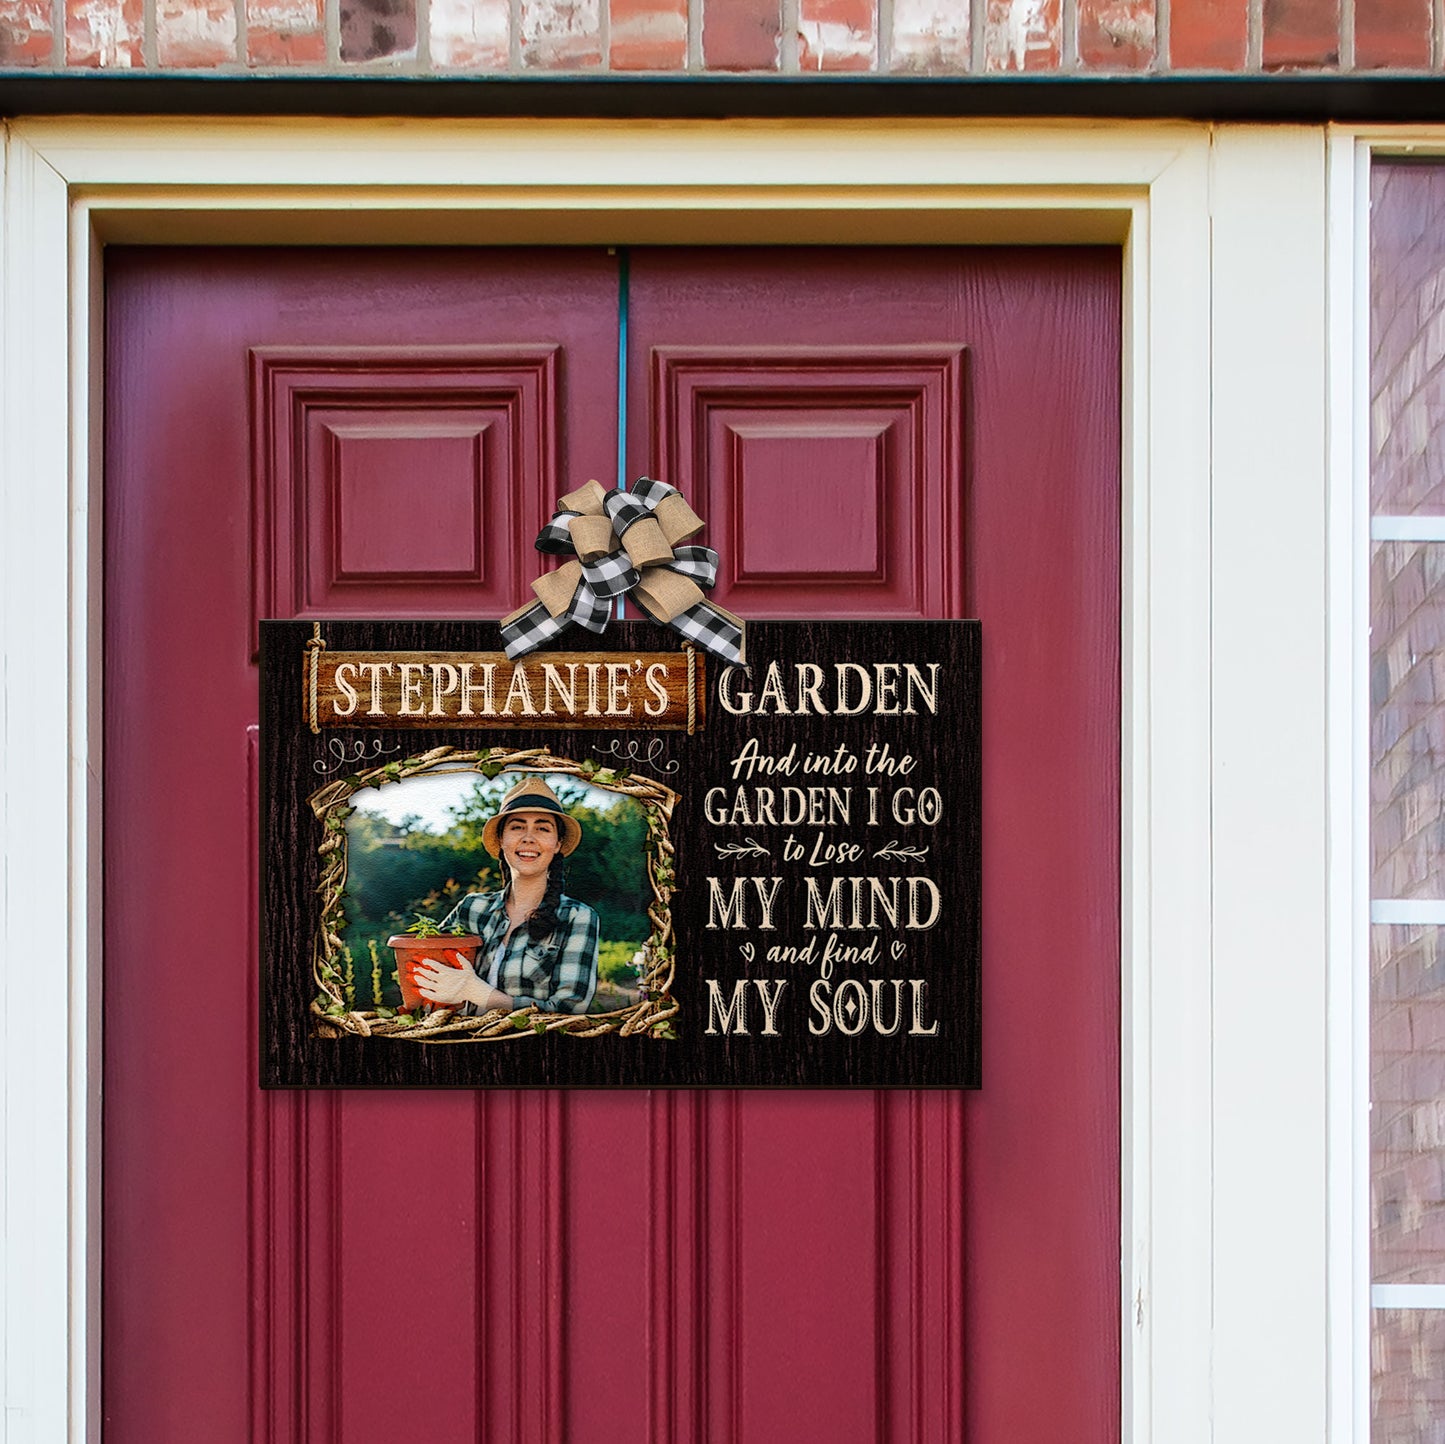 Lose My Mind And Find My Soul - Personalized Custom Shaped Wood Photo Sign